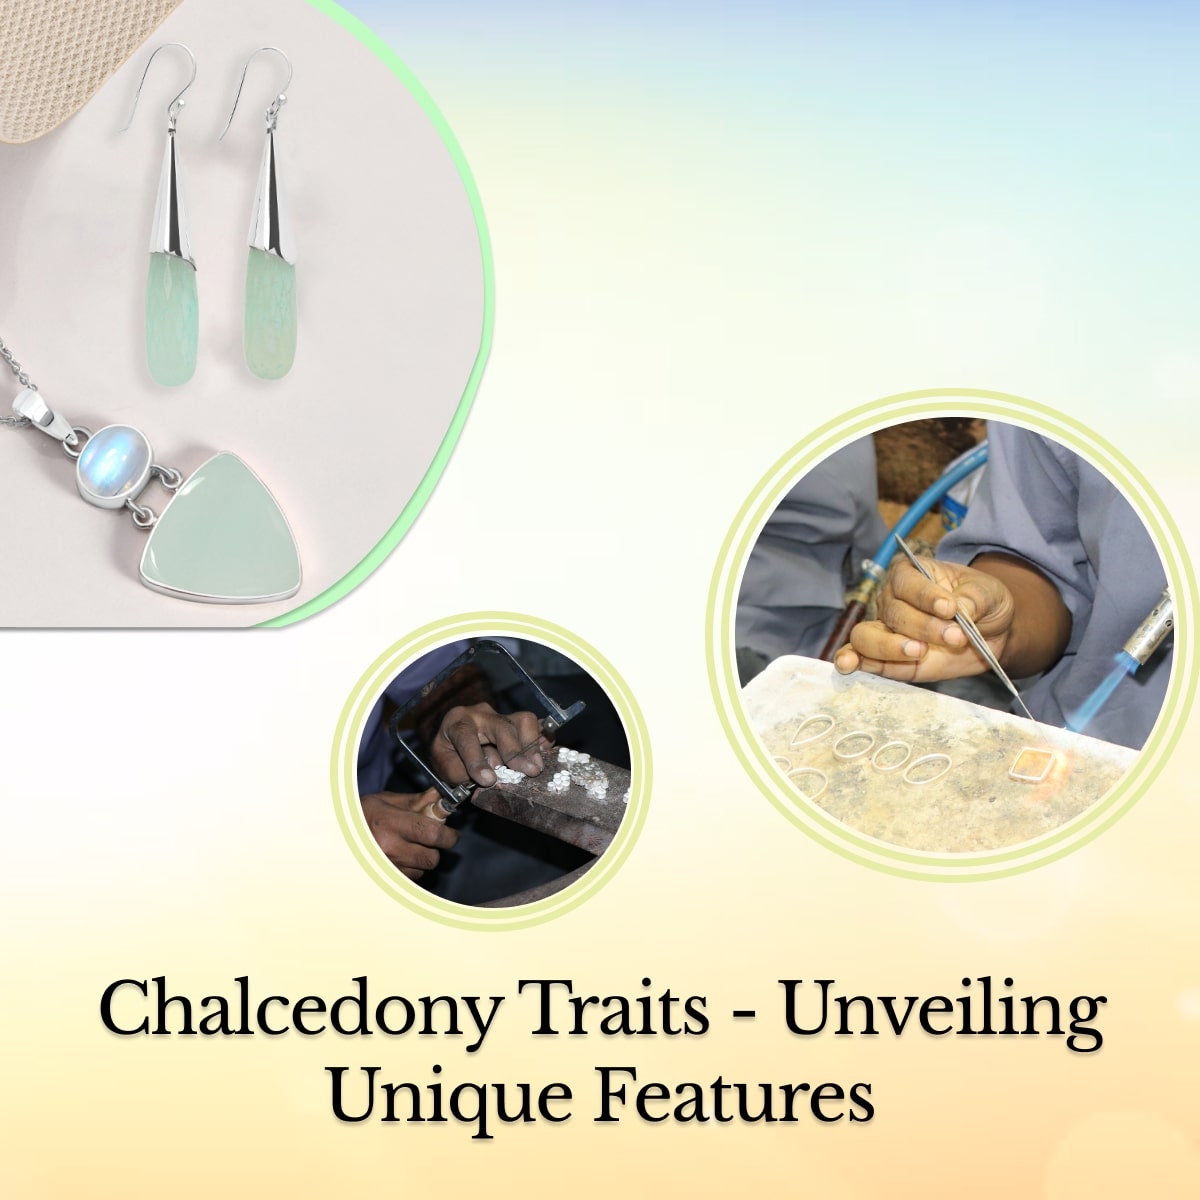 Some of the Characteristic Traits of Chalcedony